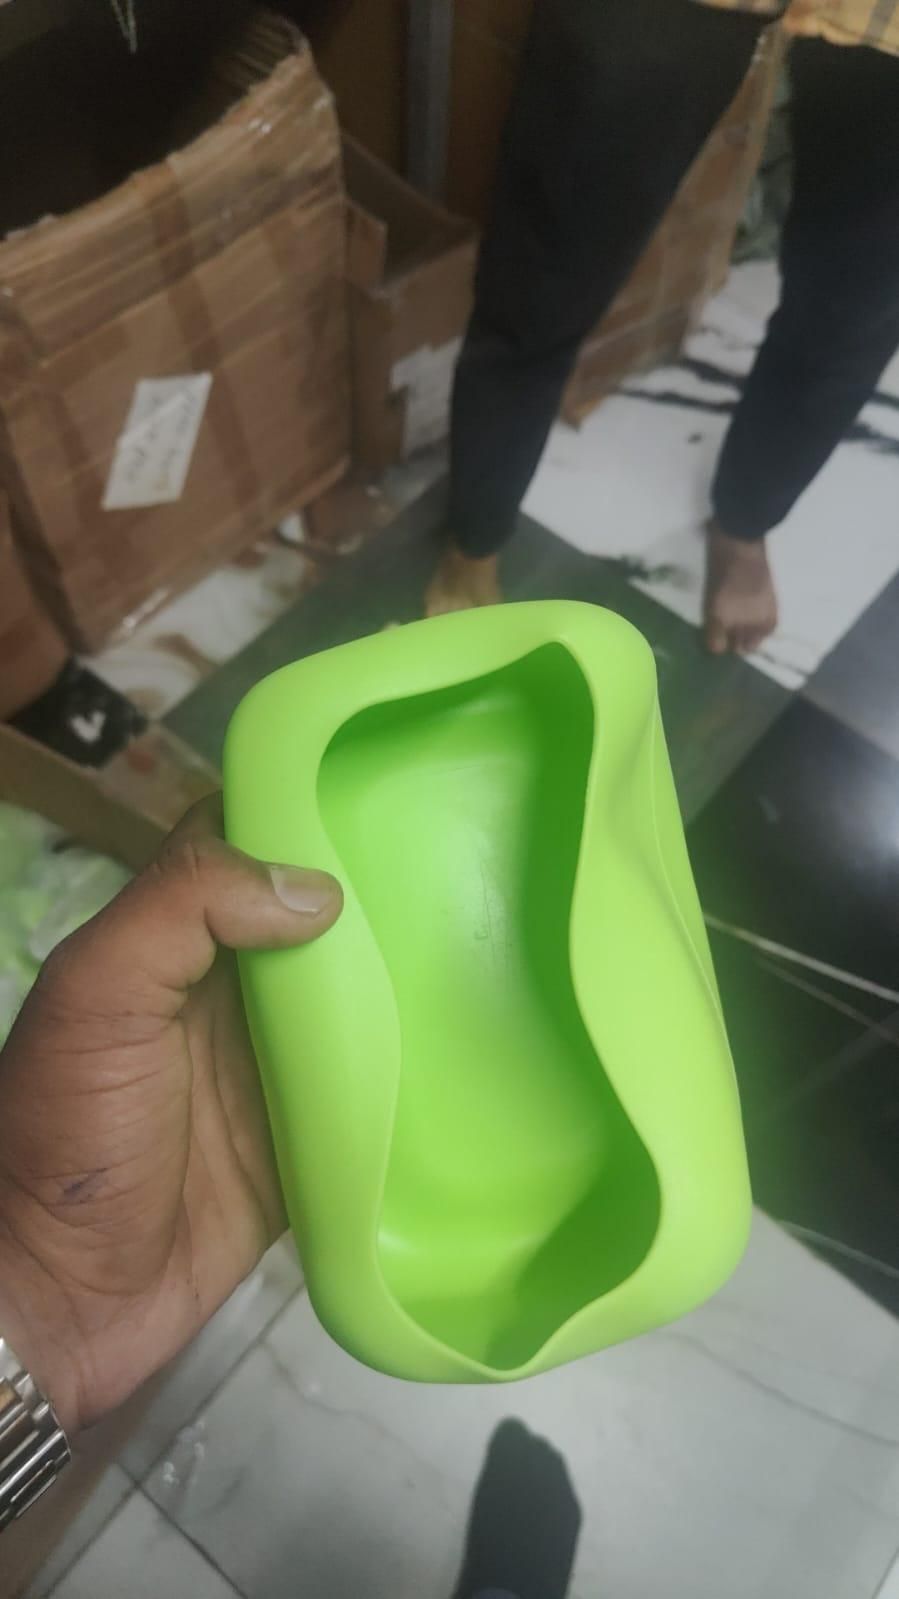 Suction Cup Tissue Box